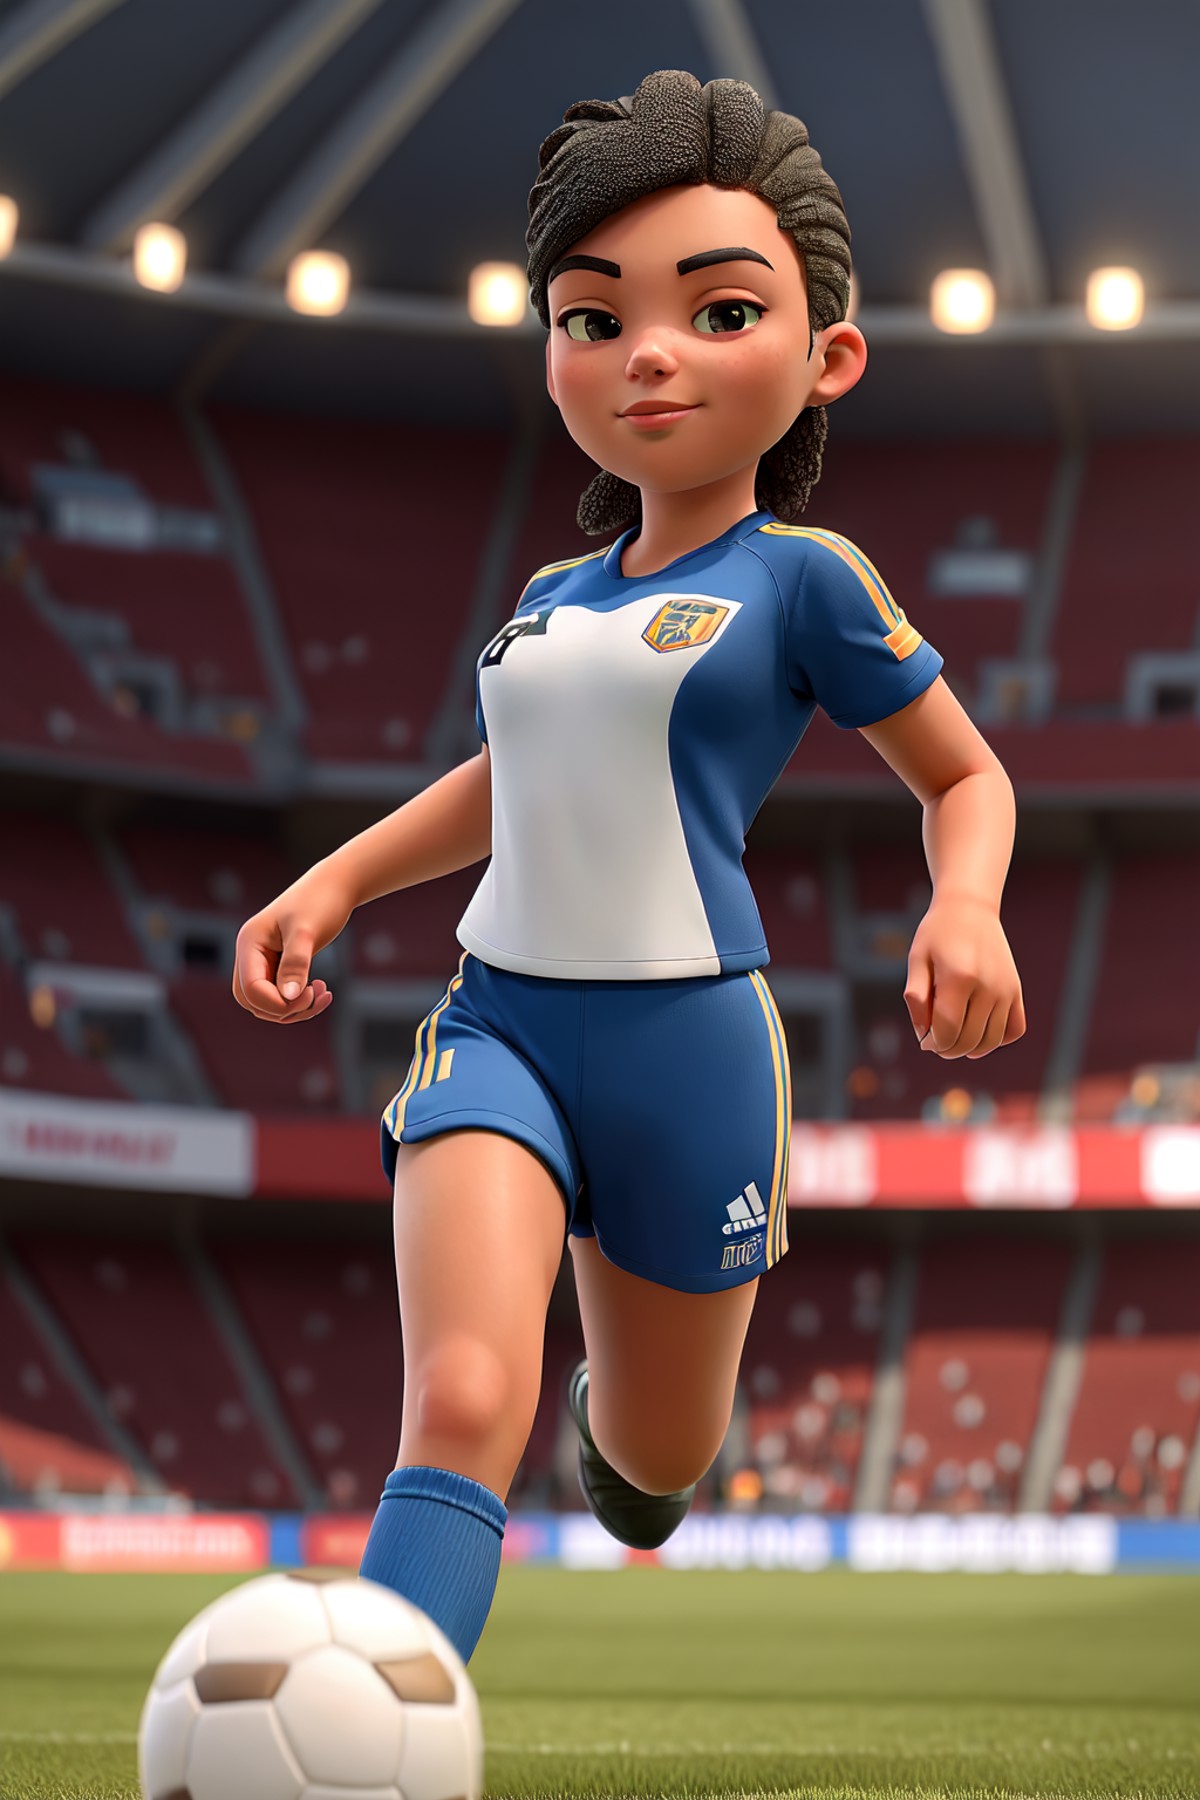 masterpiece, best quality, Female Soccer Player, Soccer, Football, Athlete, Sports, Stadium, Competition, Team, Goal, Acti...